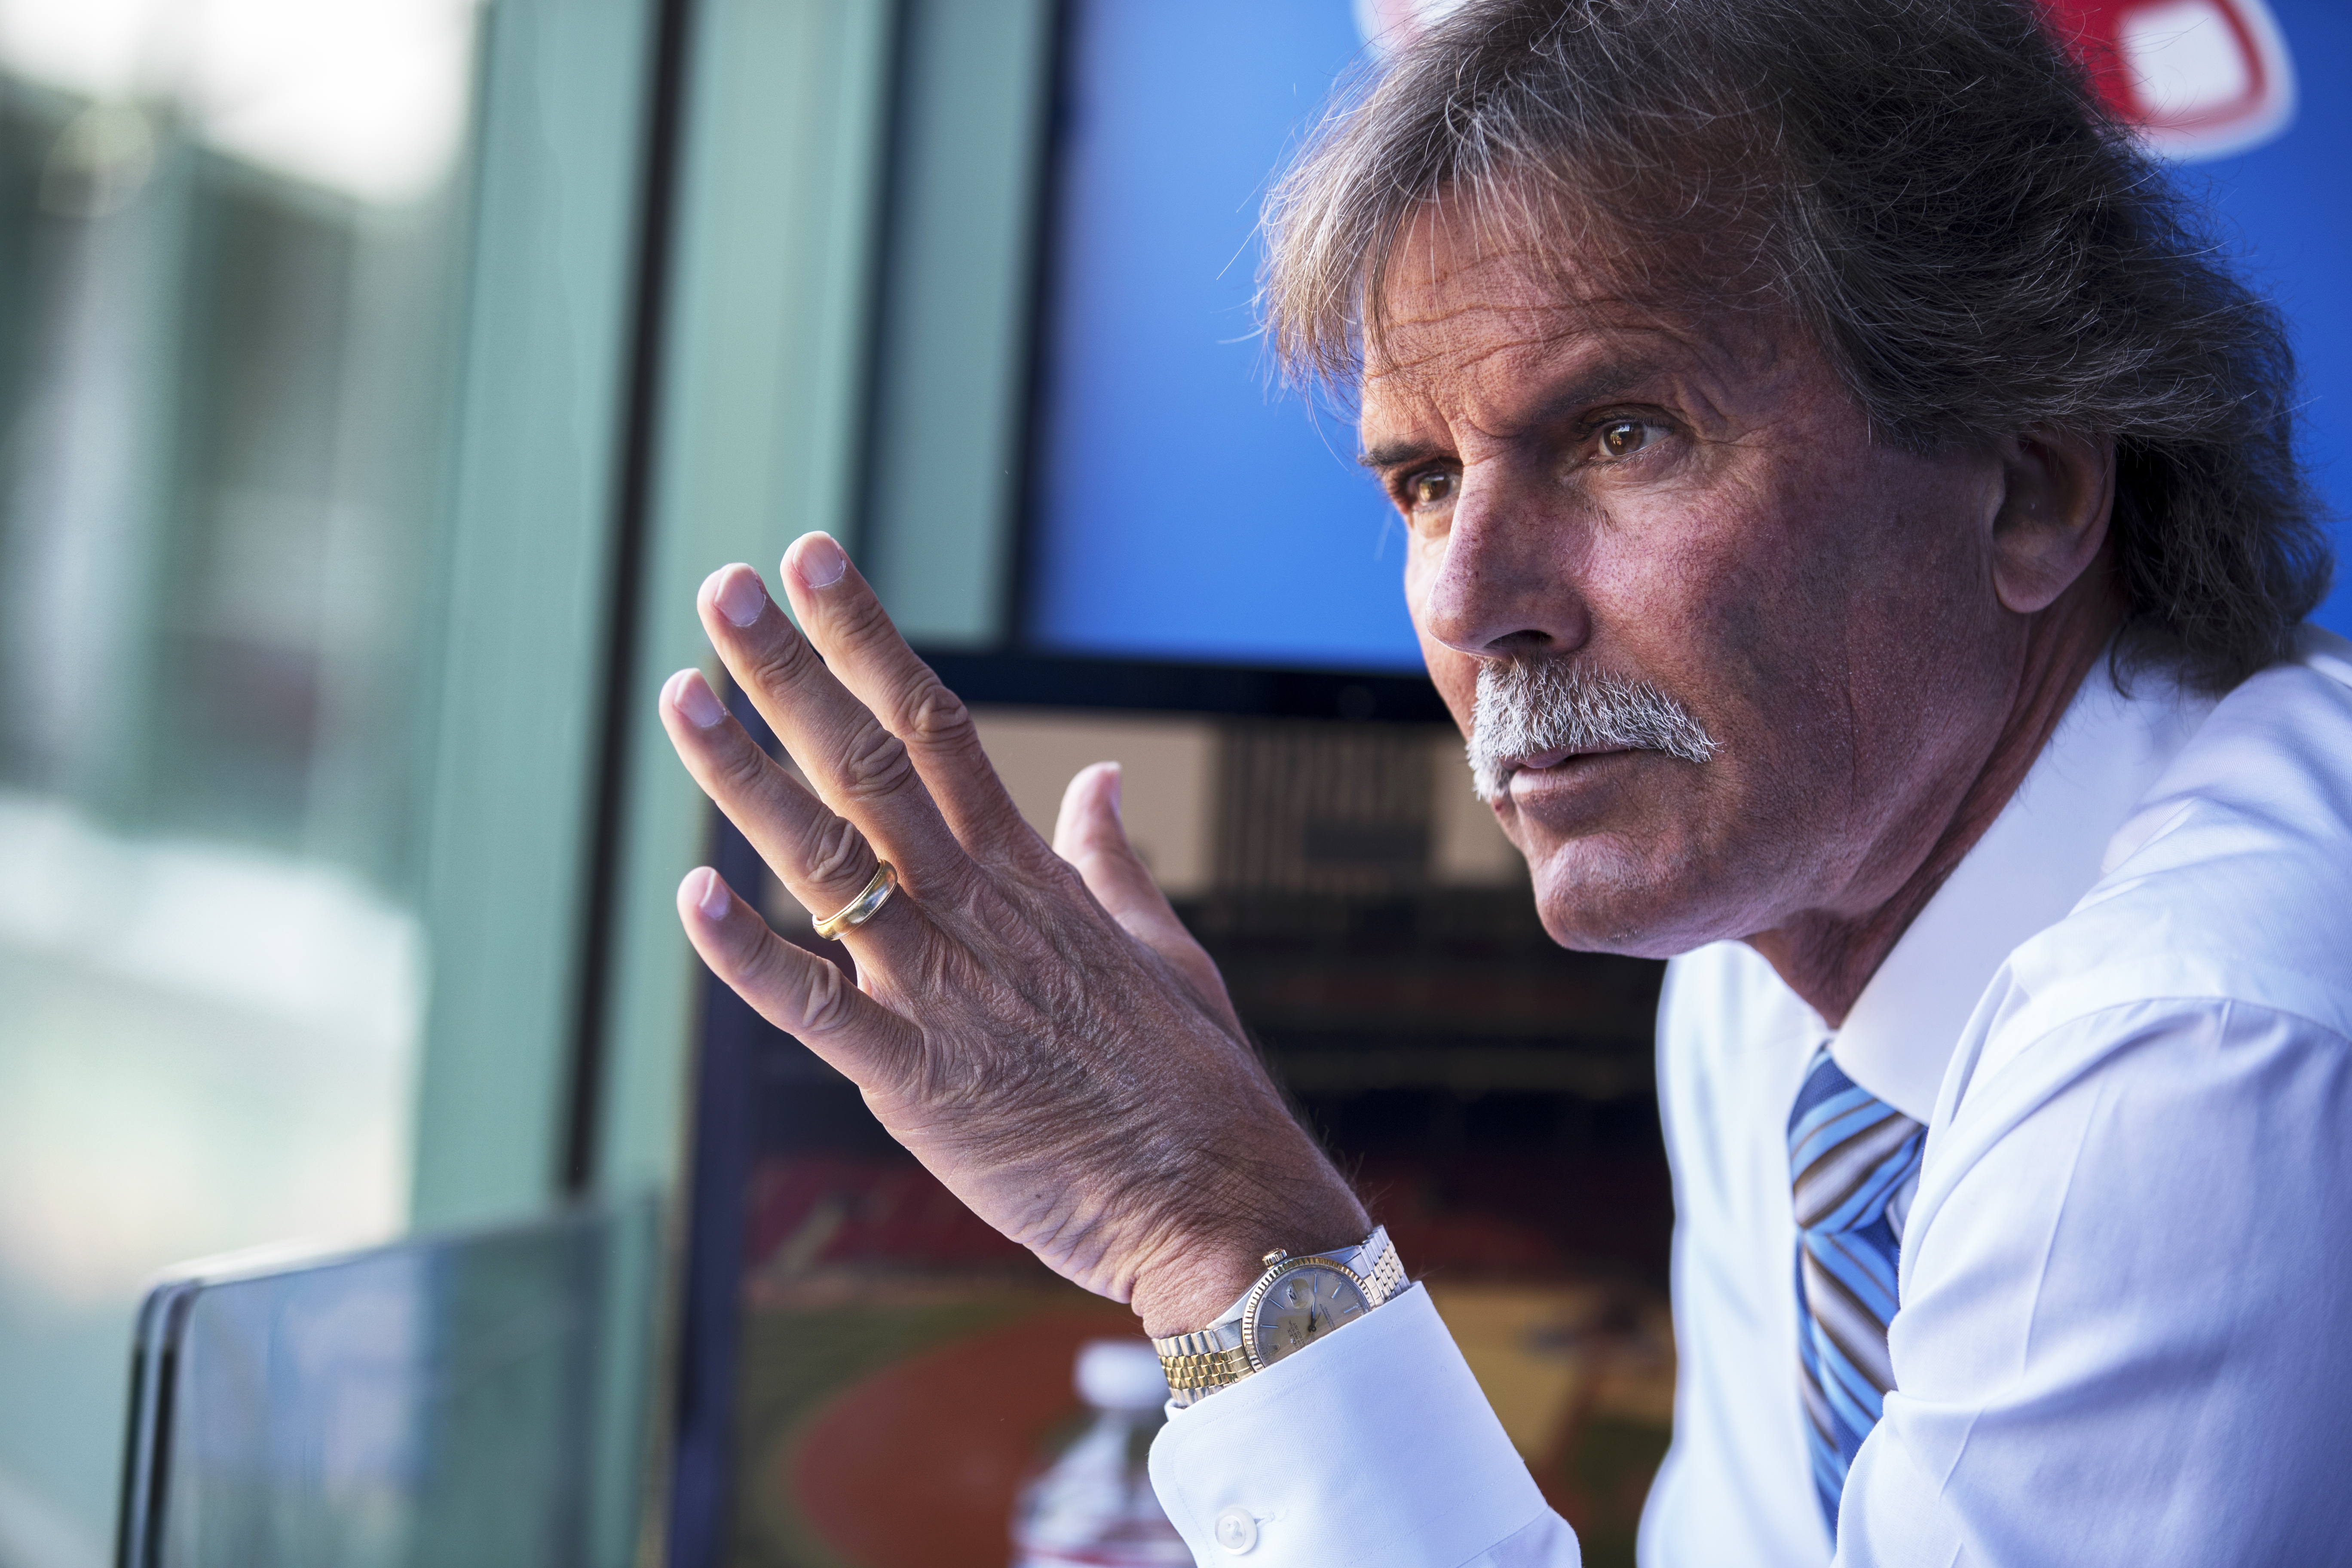 Dennis Eckersley: The hair, the 'stache, the saves